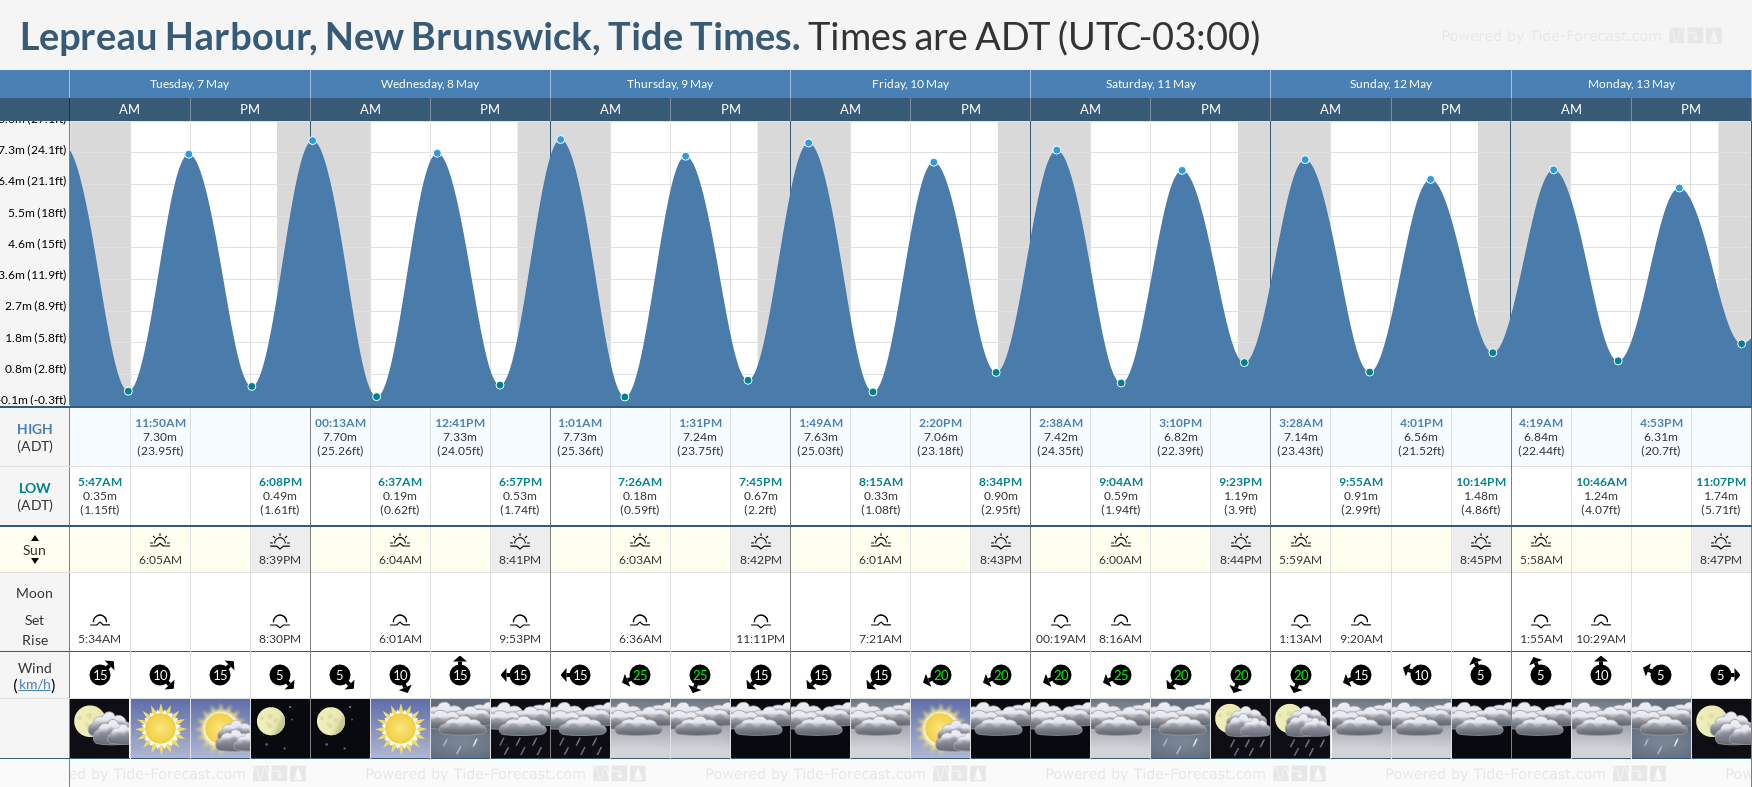 Lepreau Harbour, New Brunswick Tide Chart including high and low tide tide times for the next 7 days